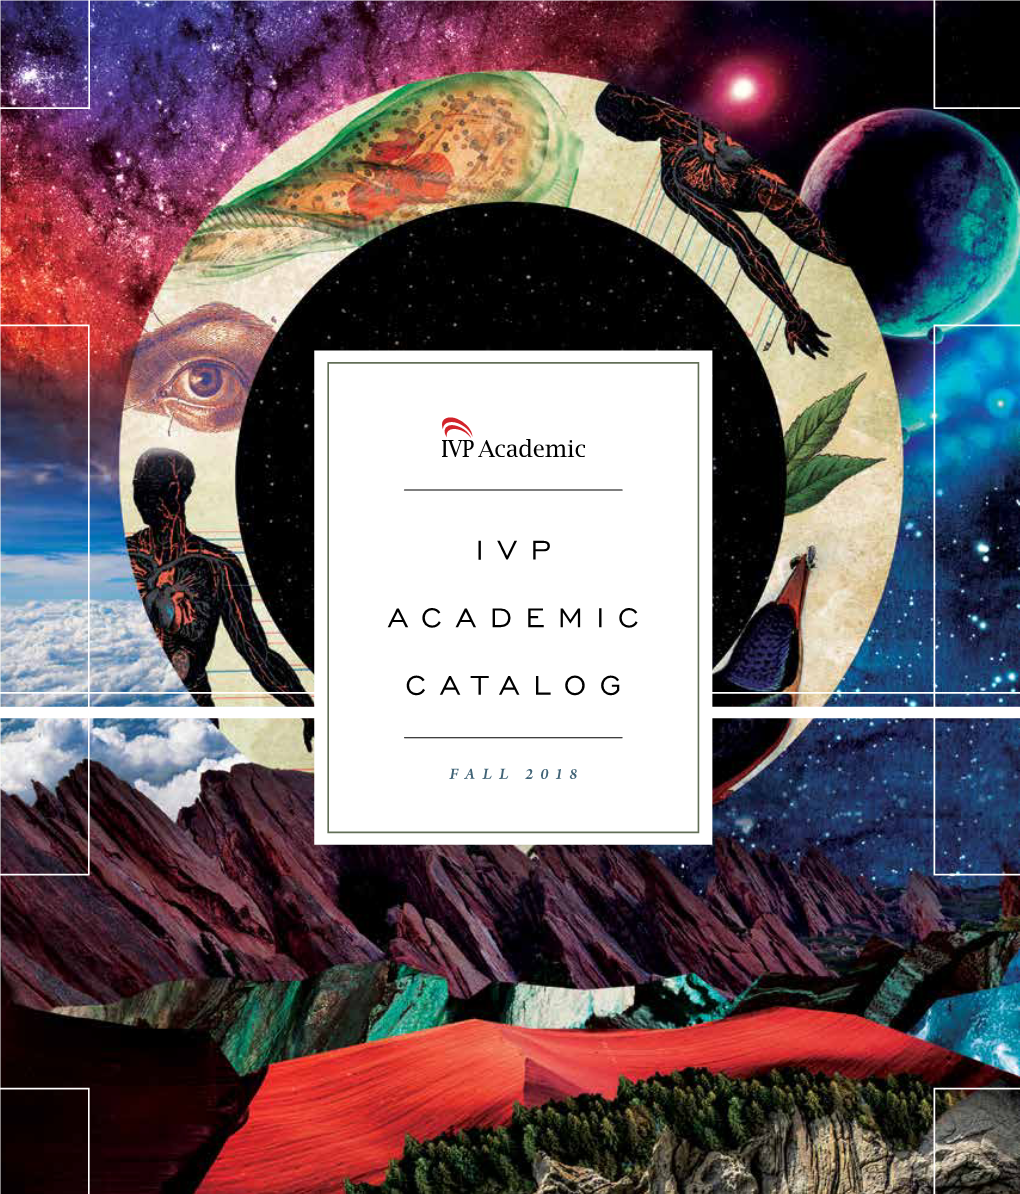 IVP Academic Catalog) Are Surely Authors